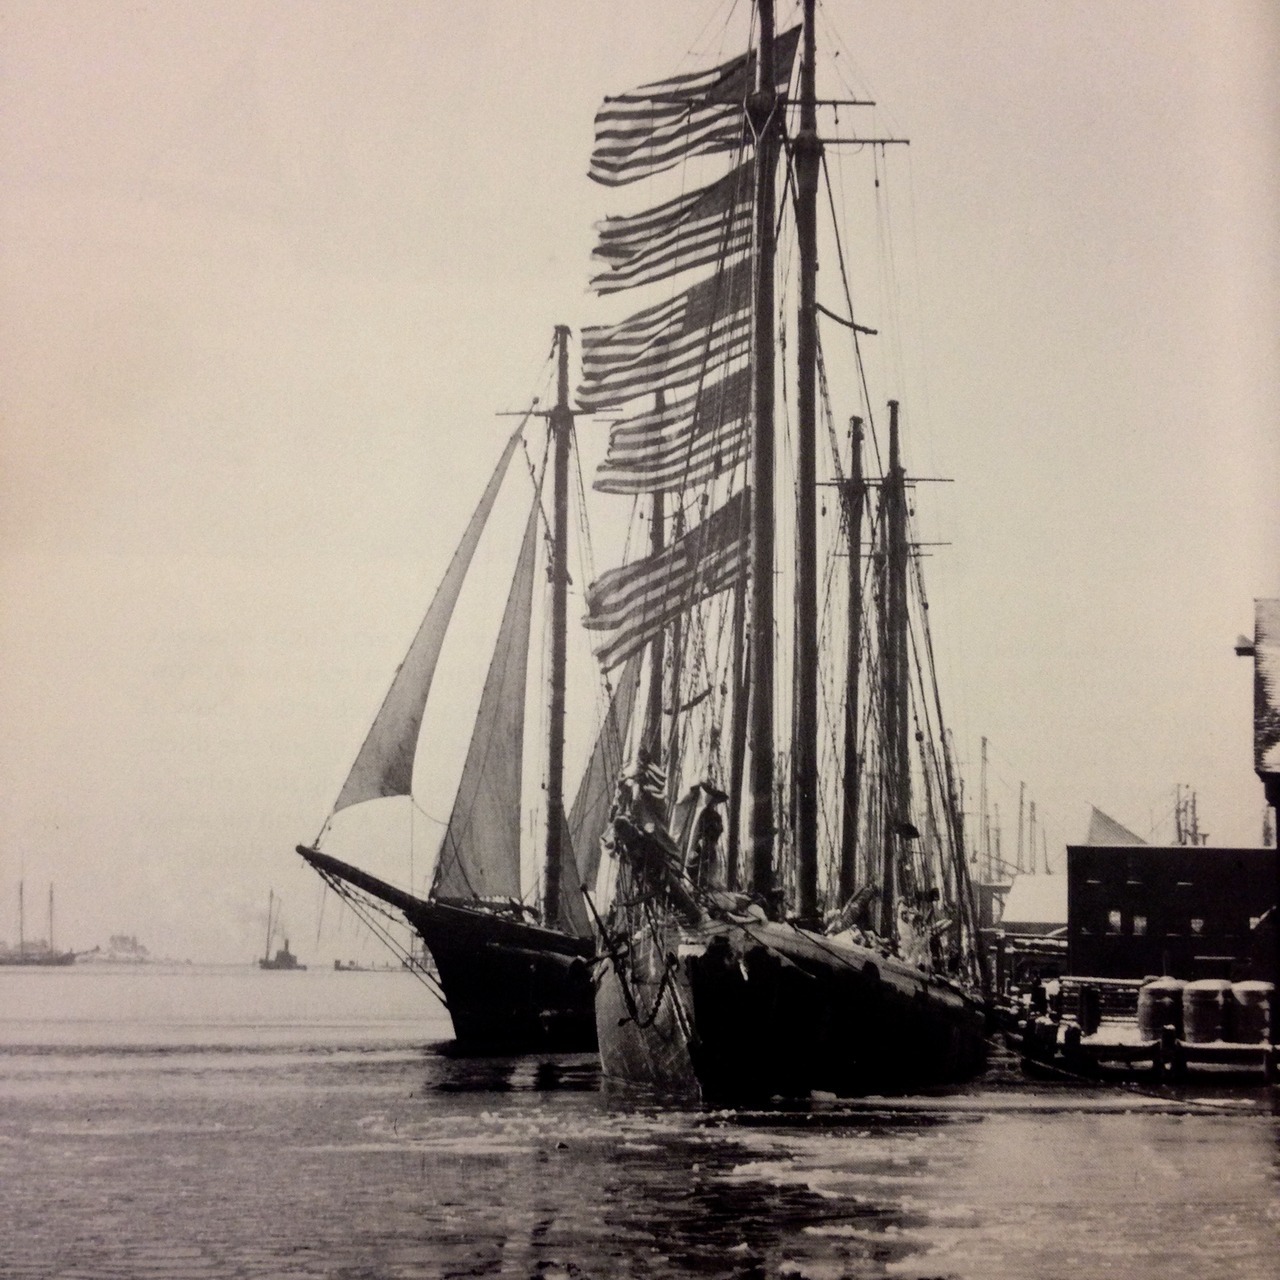 rickinmar:
“Gloucester Harbor. about 1910.
”